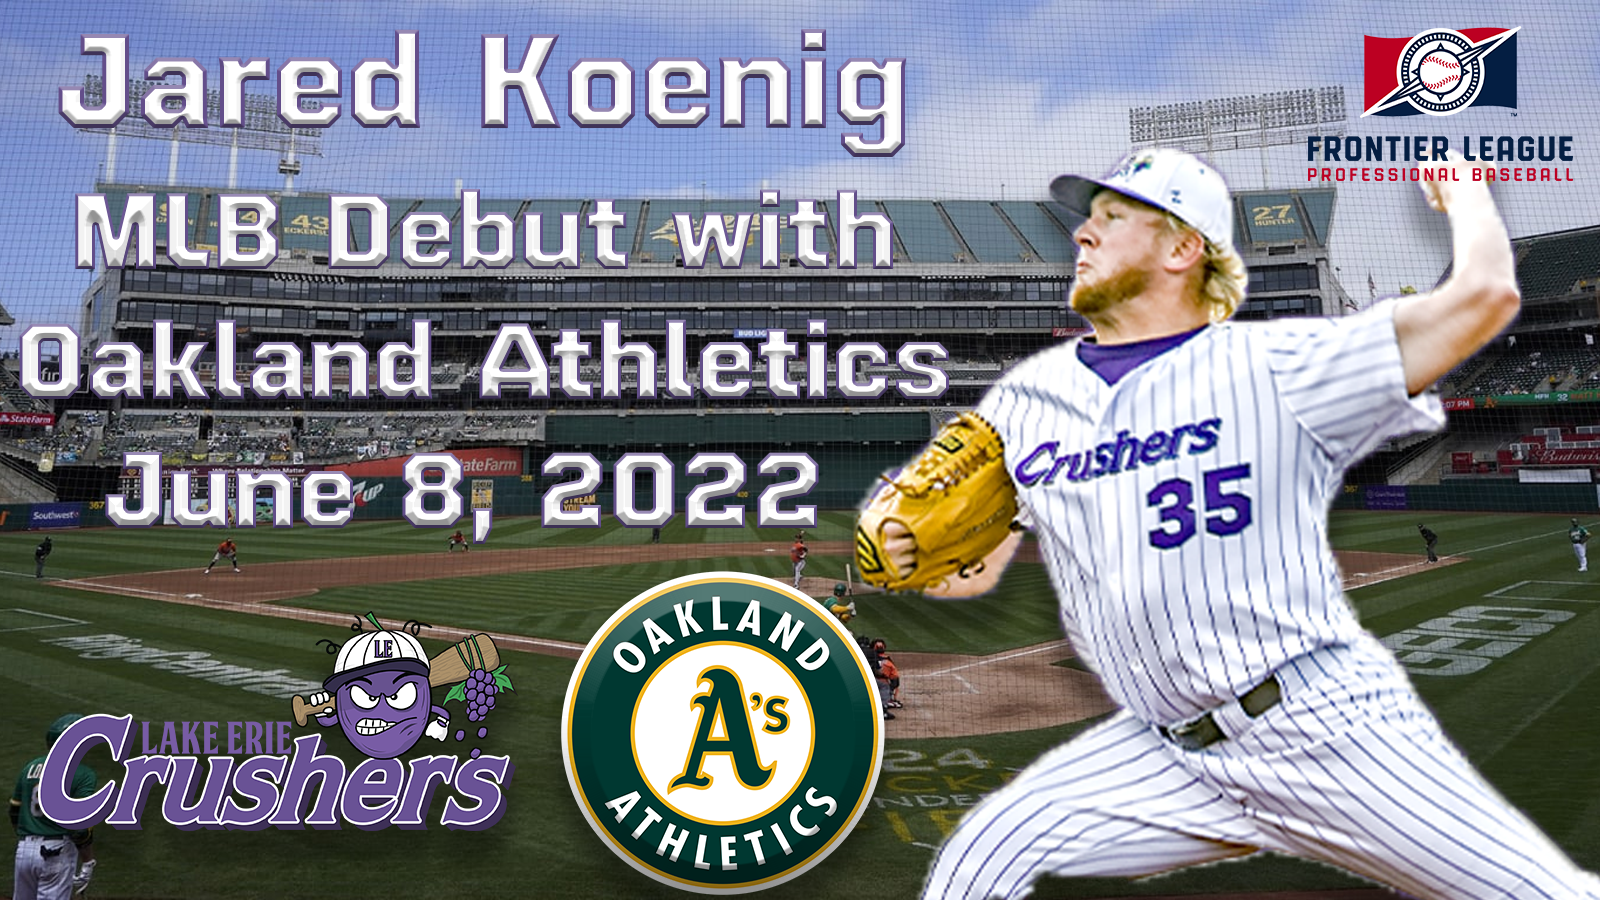 Jared Koenig, former Lake Erie Crusher, is set to make his MLB debut with the Oakland Athletics.